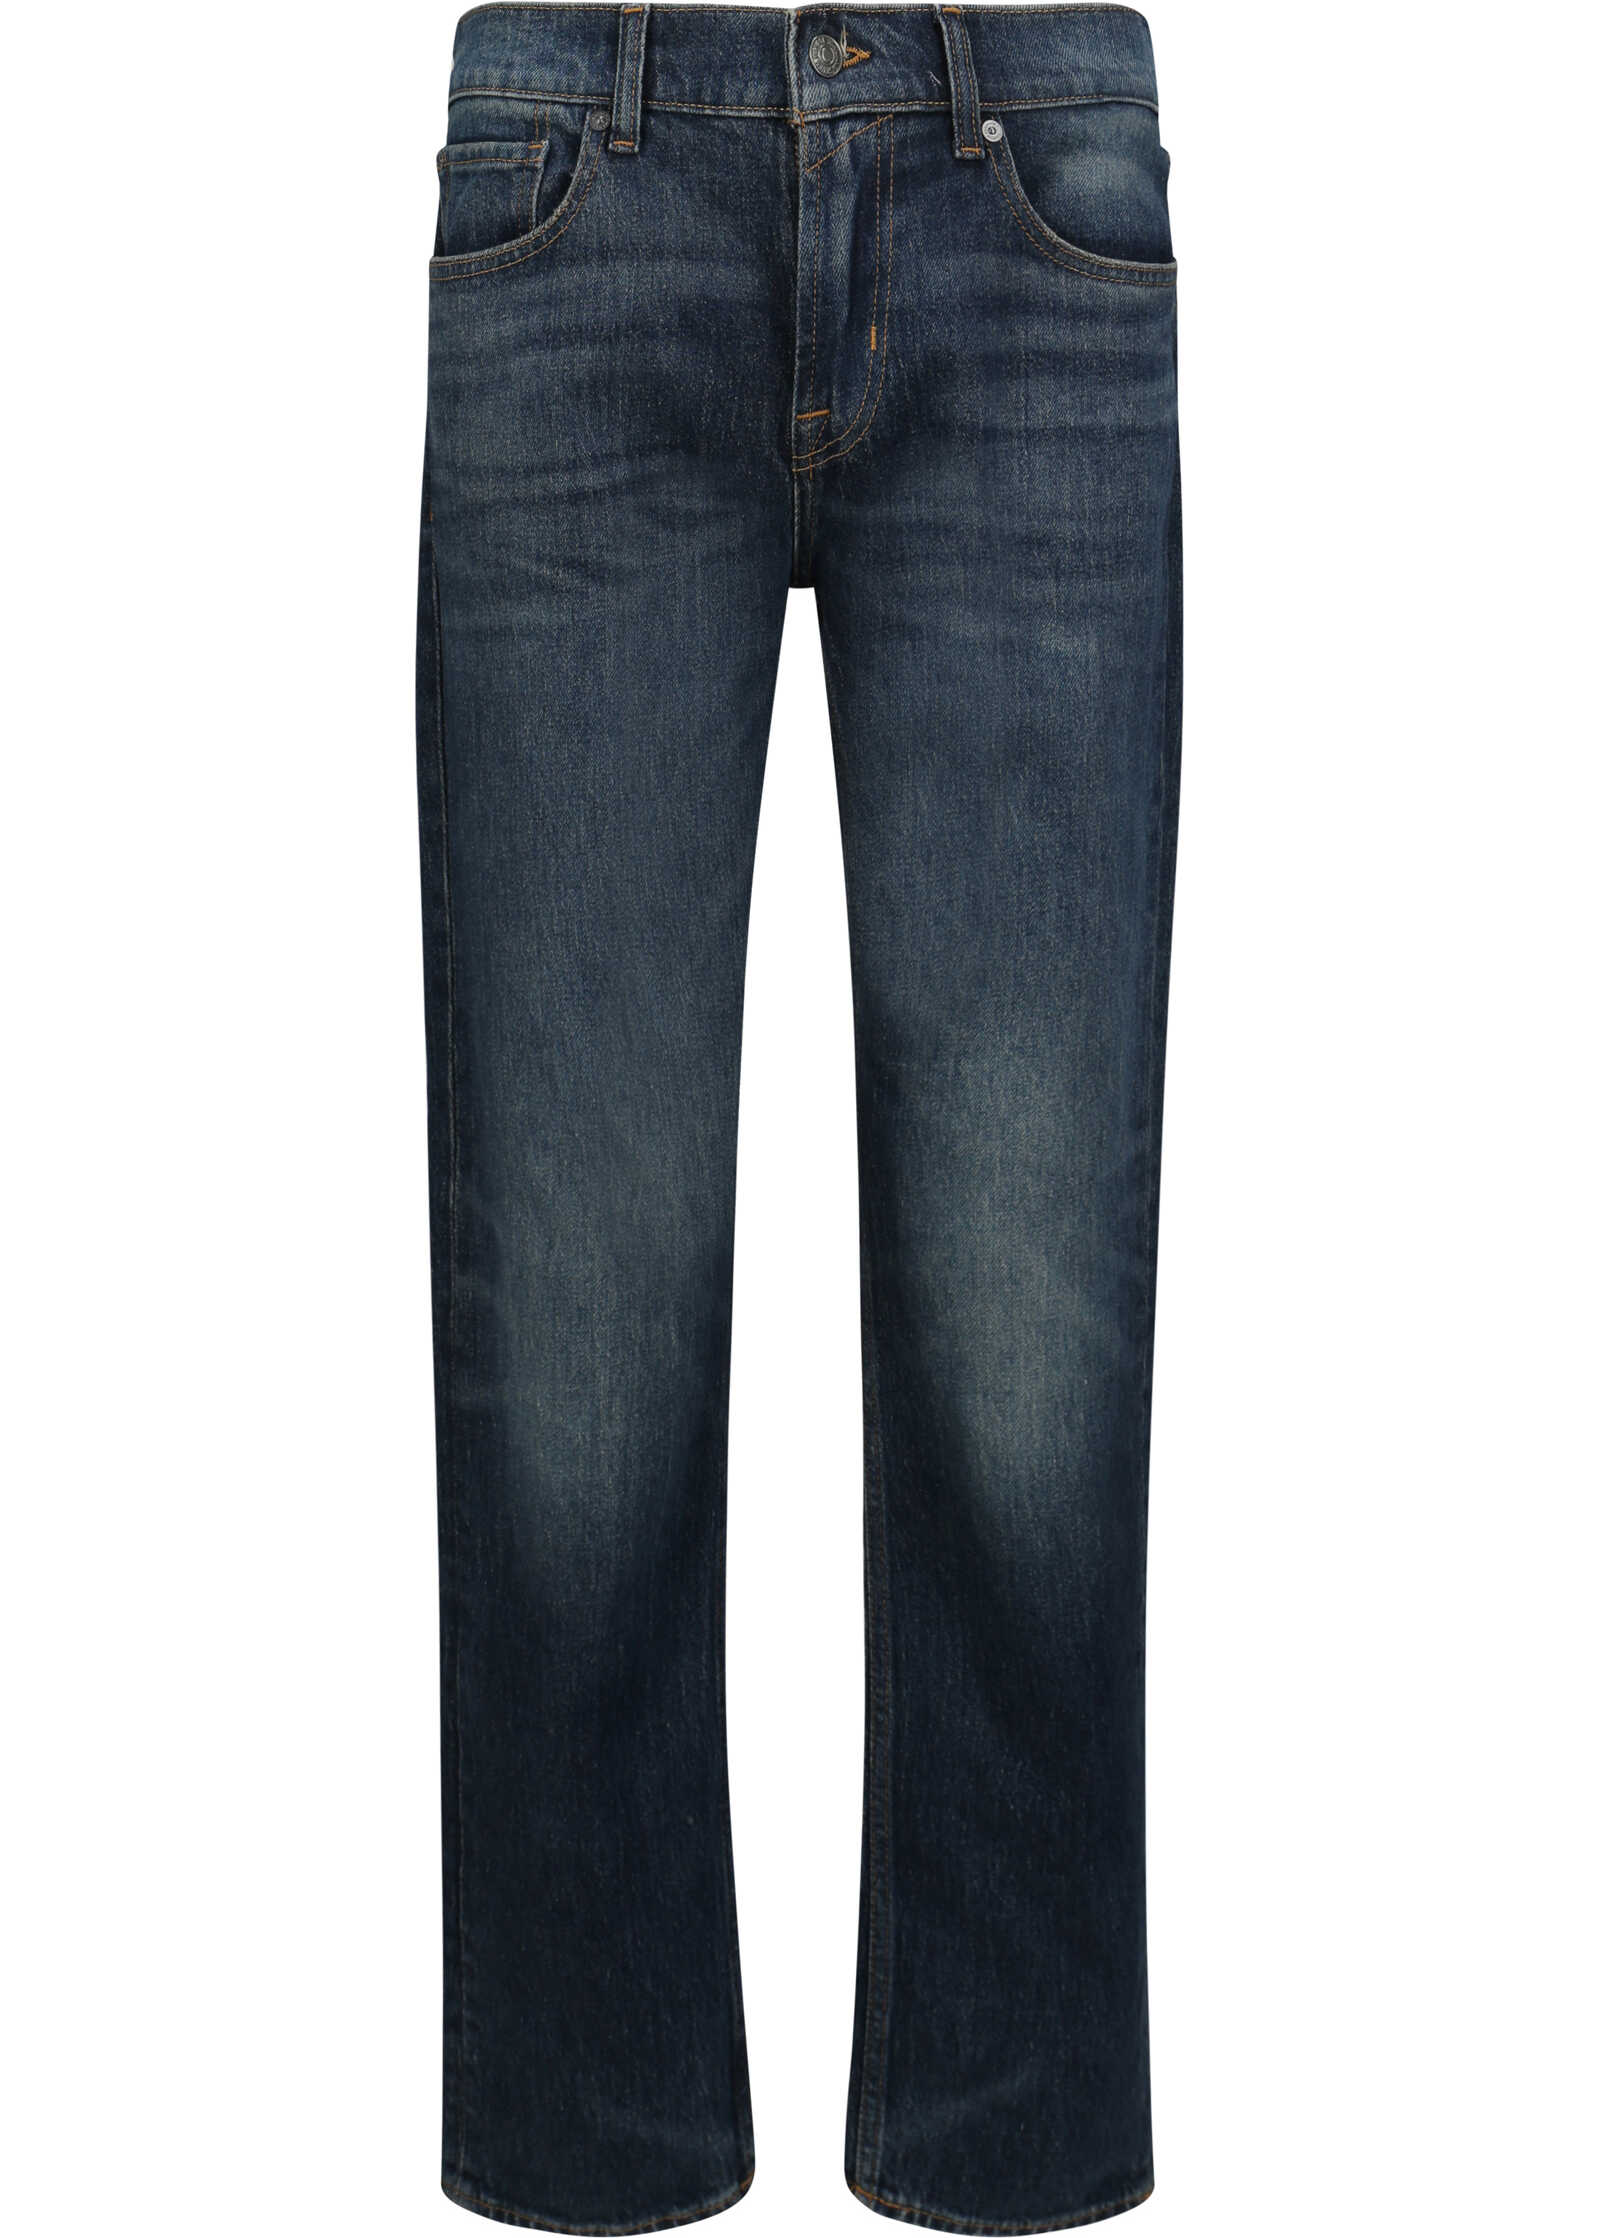 7 For All Mankind Slimmy Jeans DARK BLUE